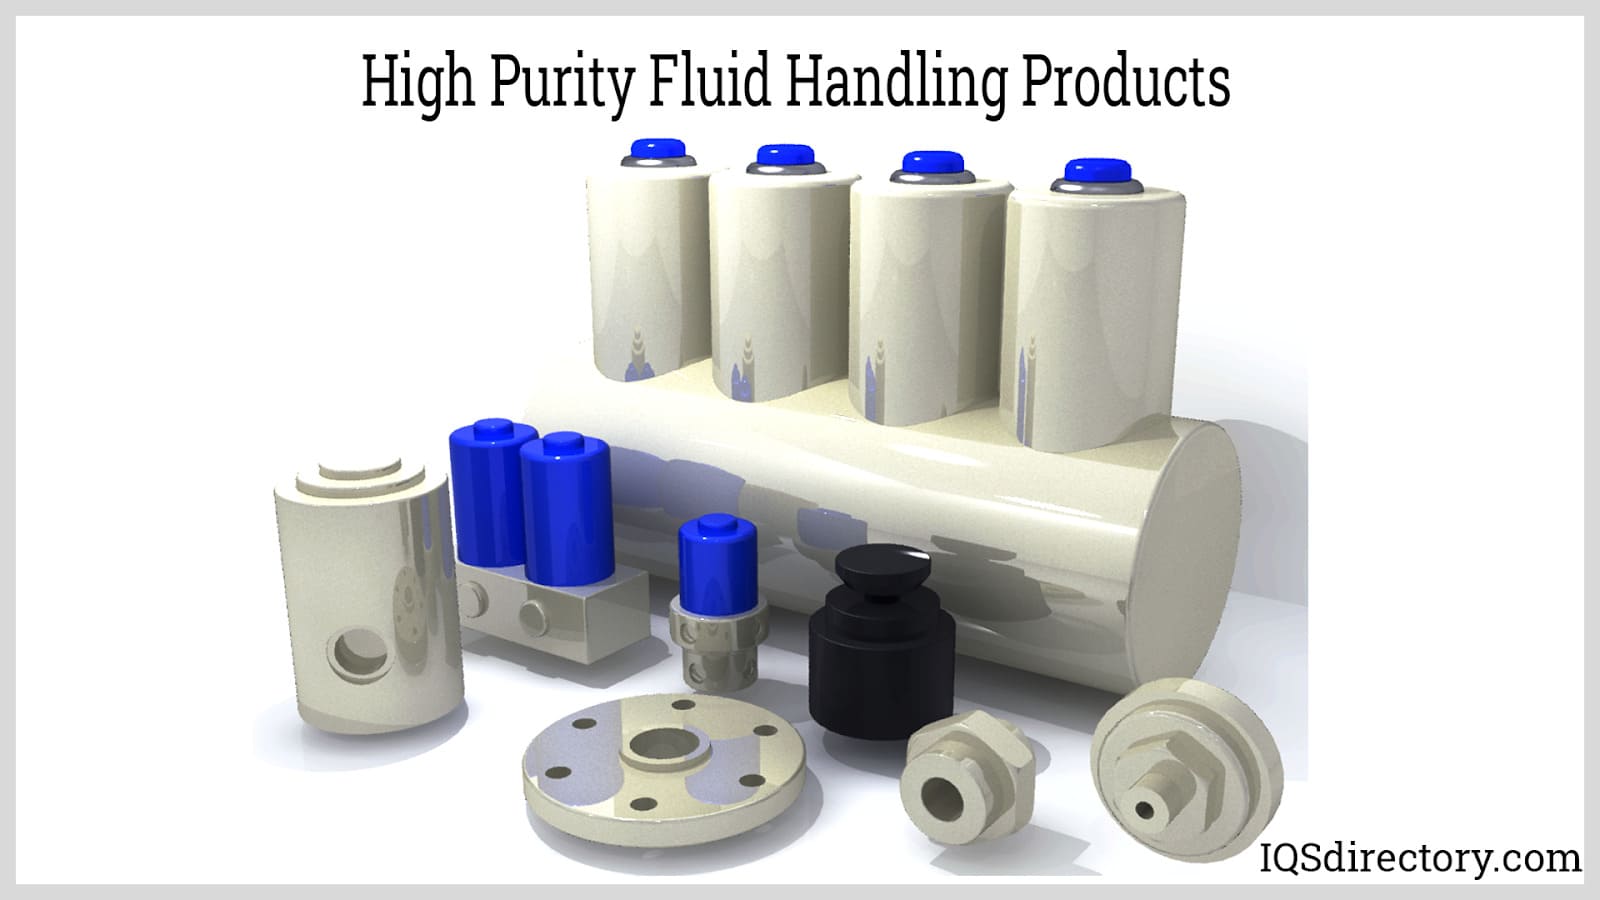 High Purity Fluid Handling Products